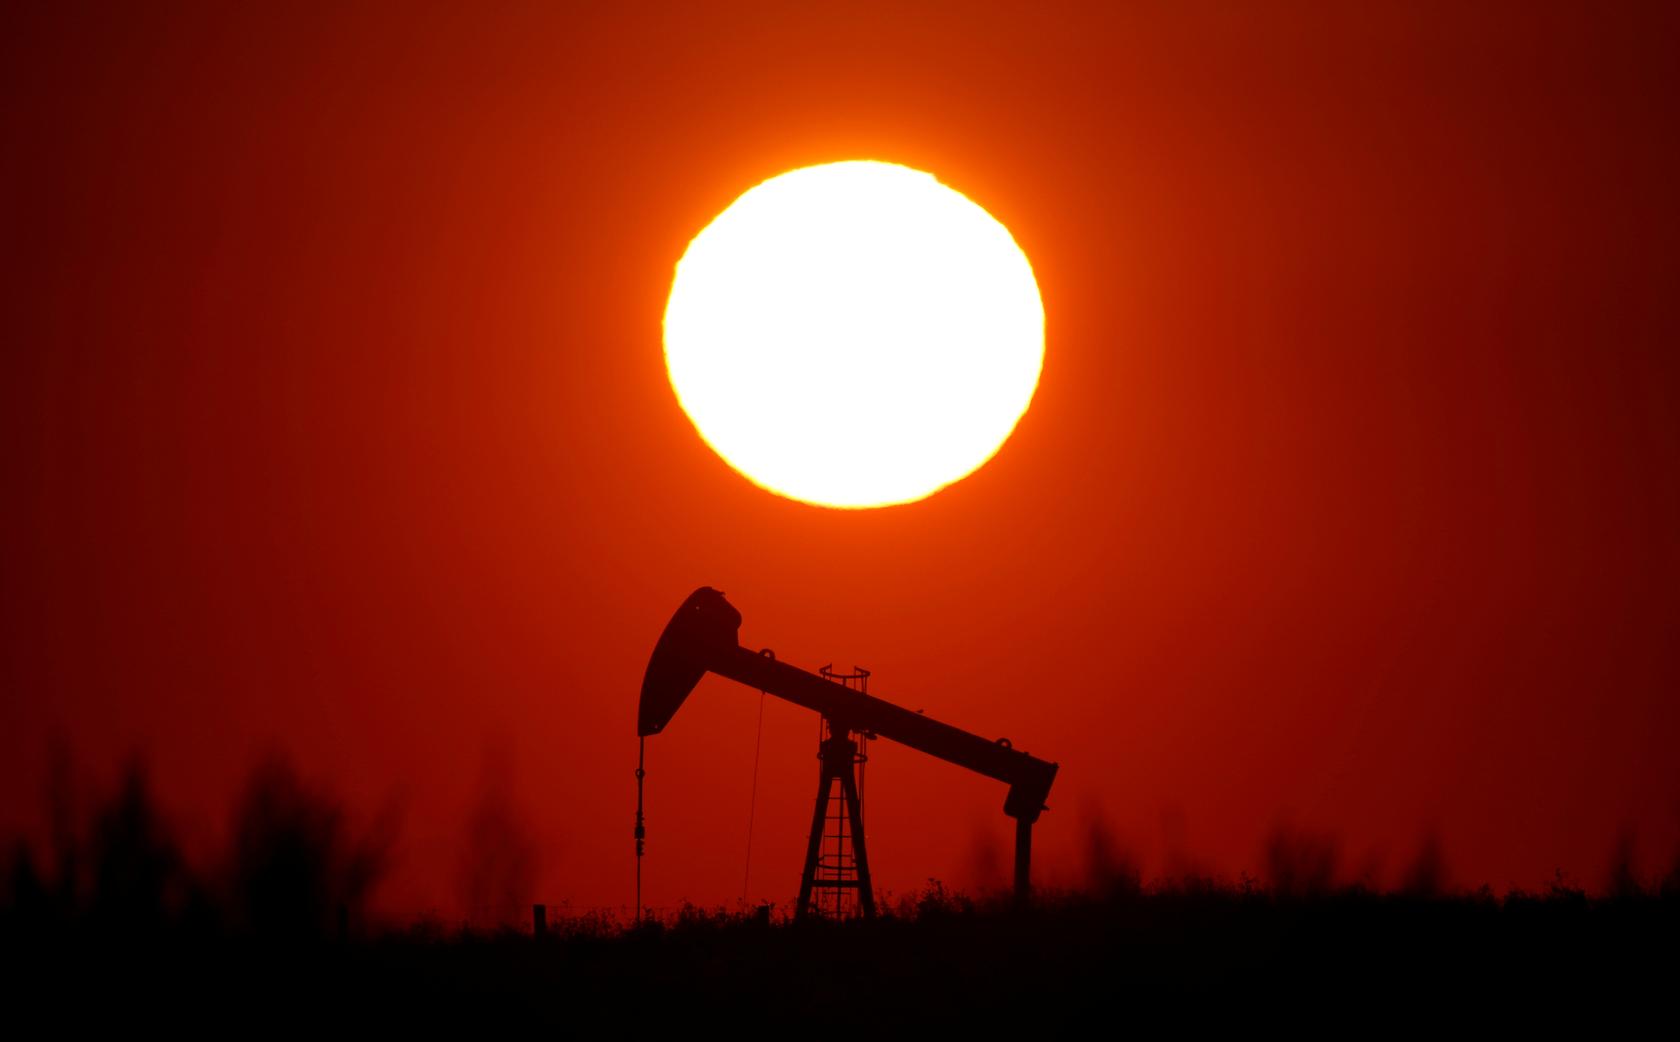 Oil eases on concerns over U.S.-China talks, weak economic data - oil and gas 360